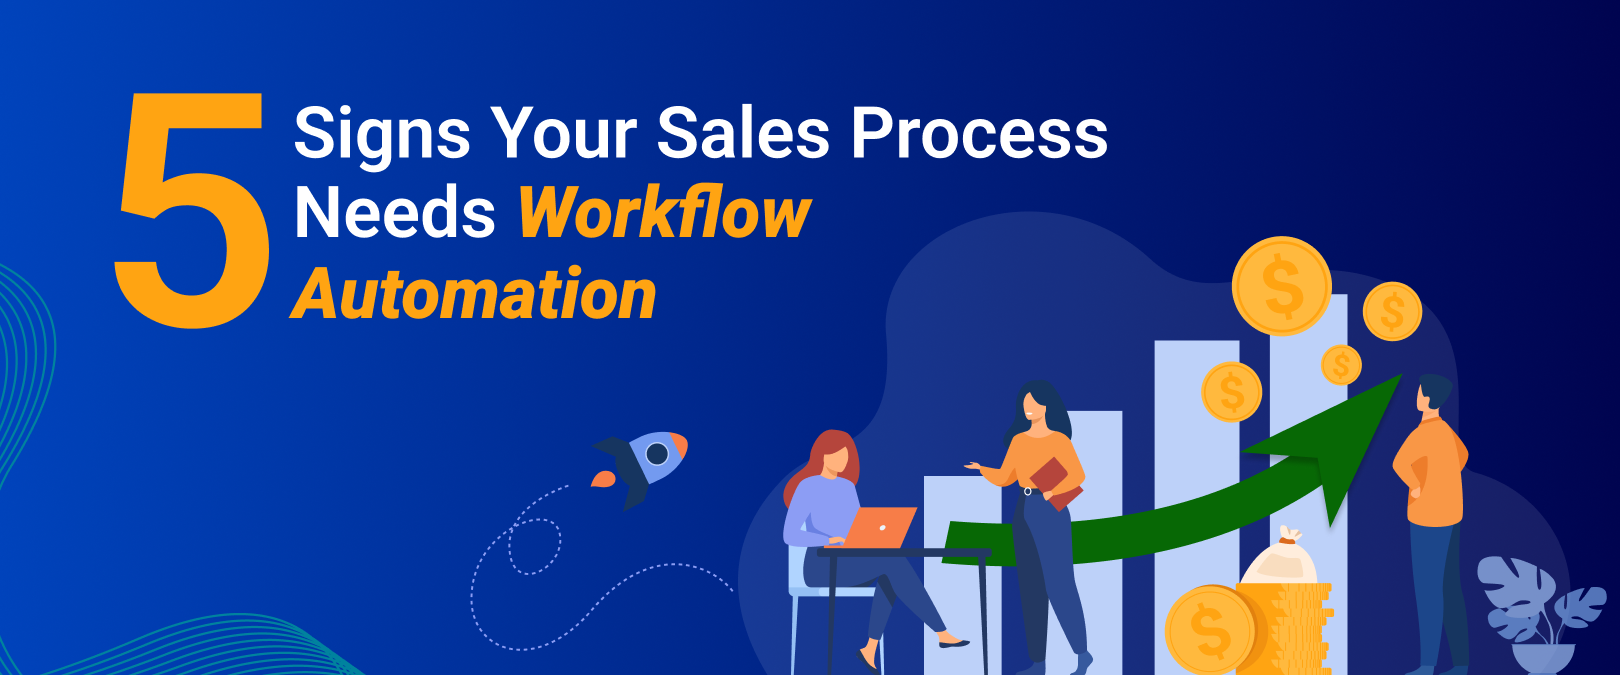 5 Signs Your Sales Process Needs Workflow Automation